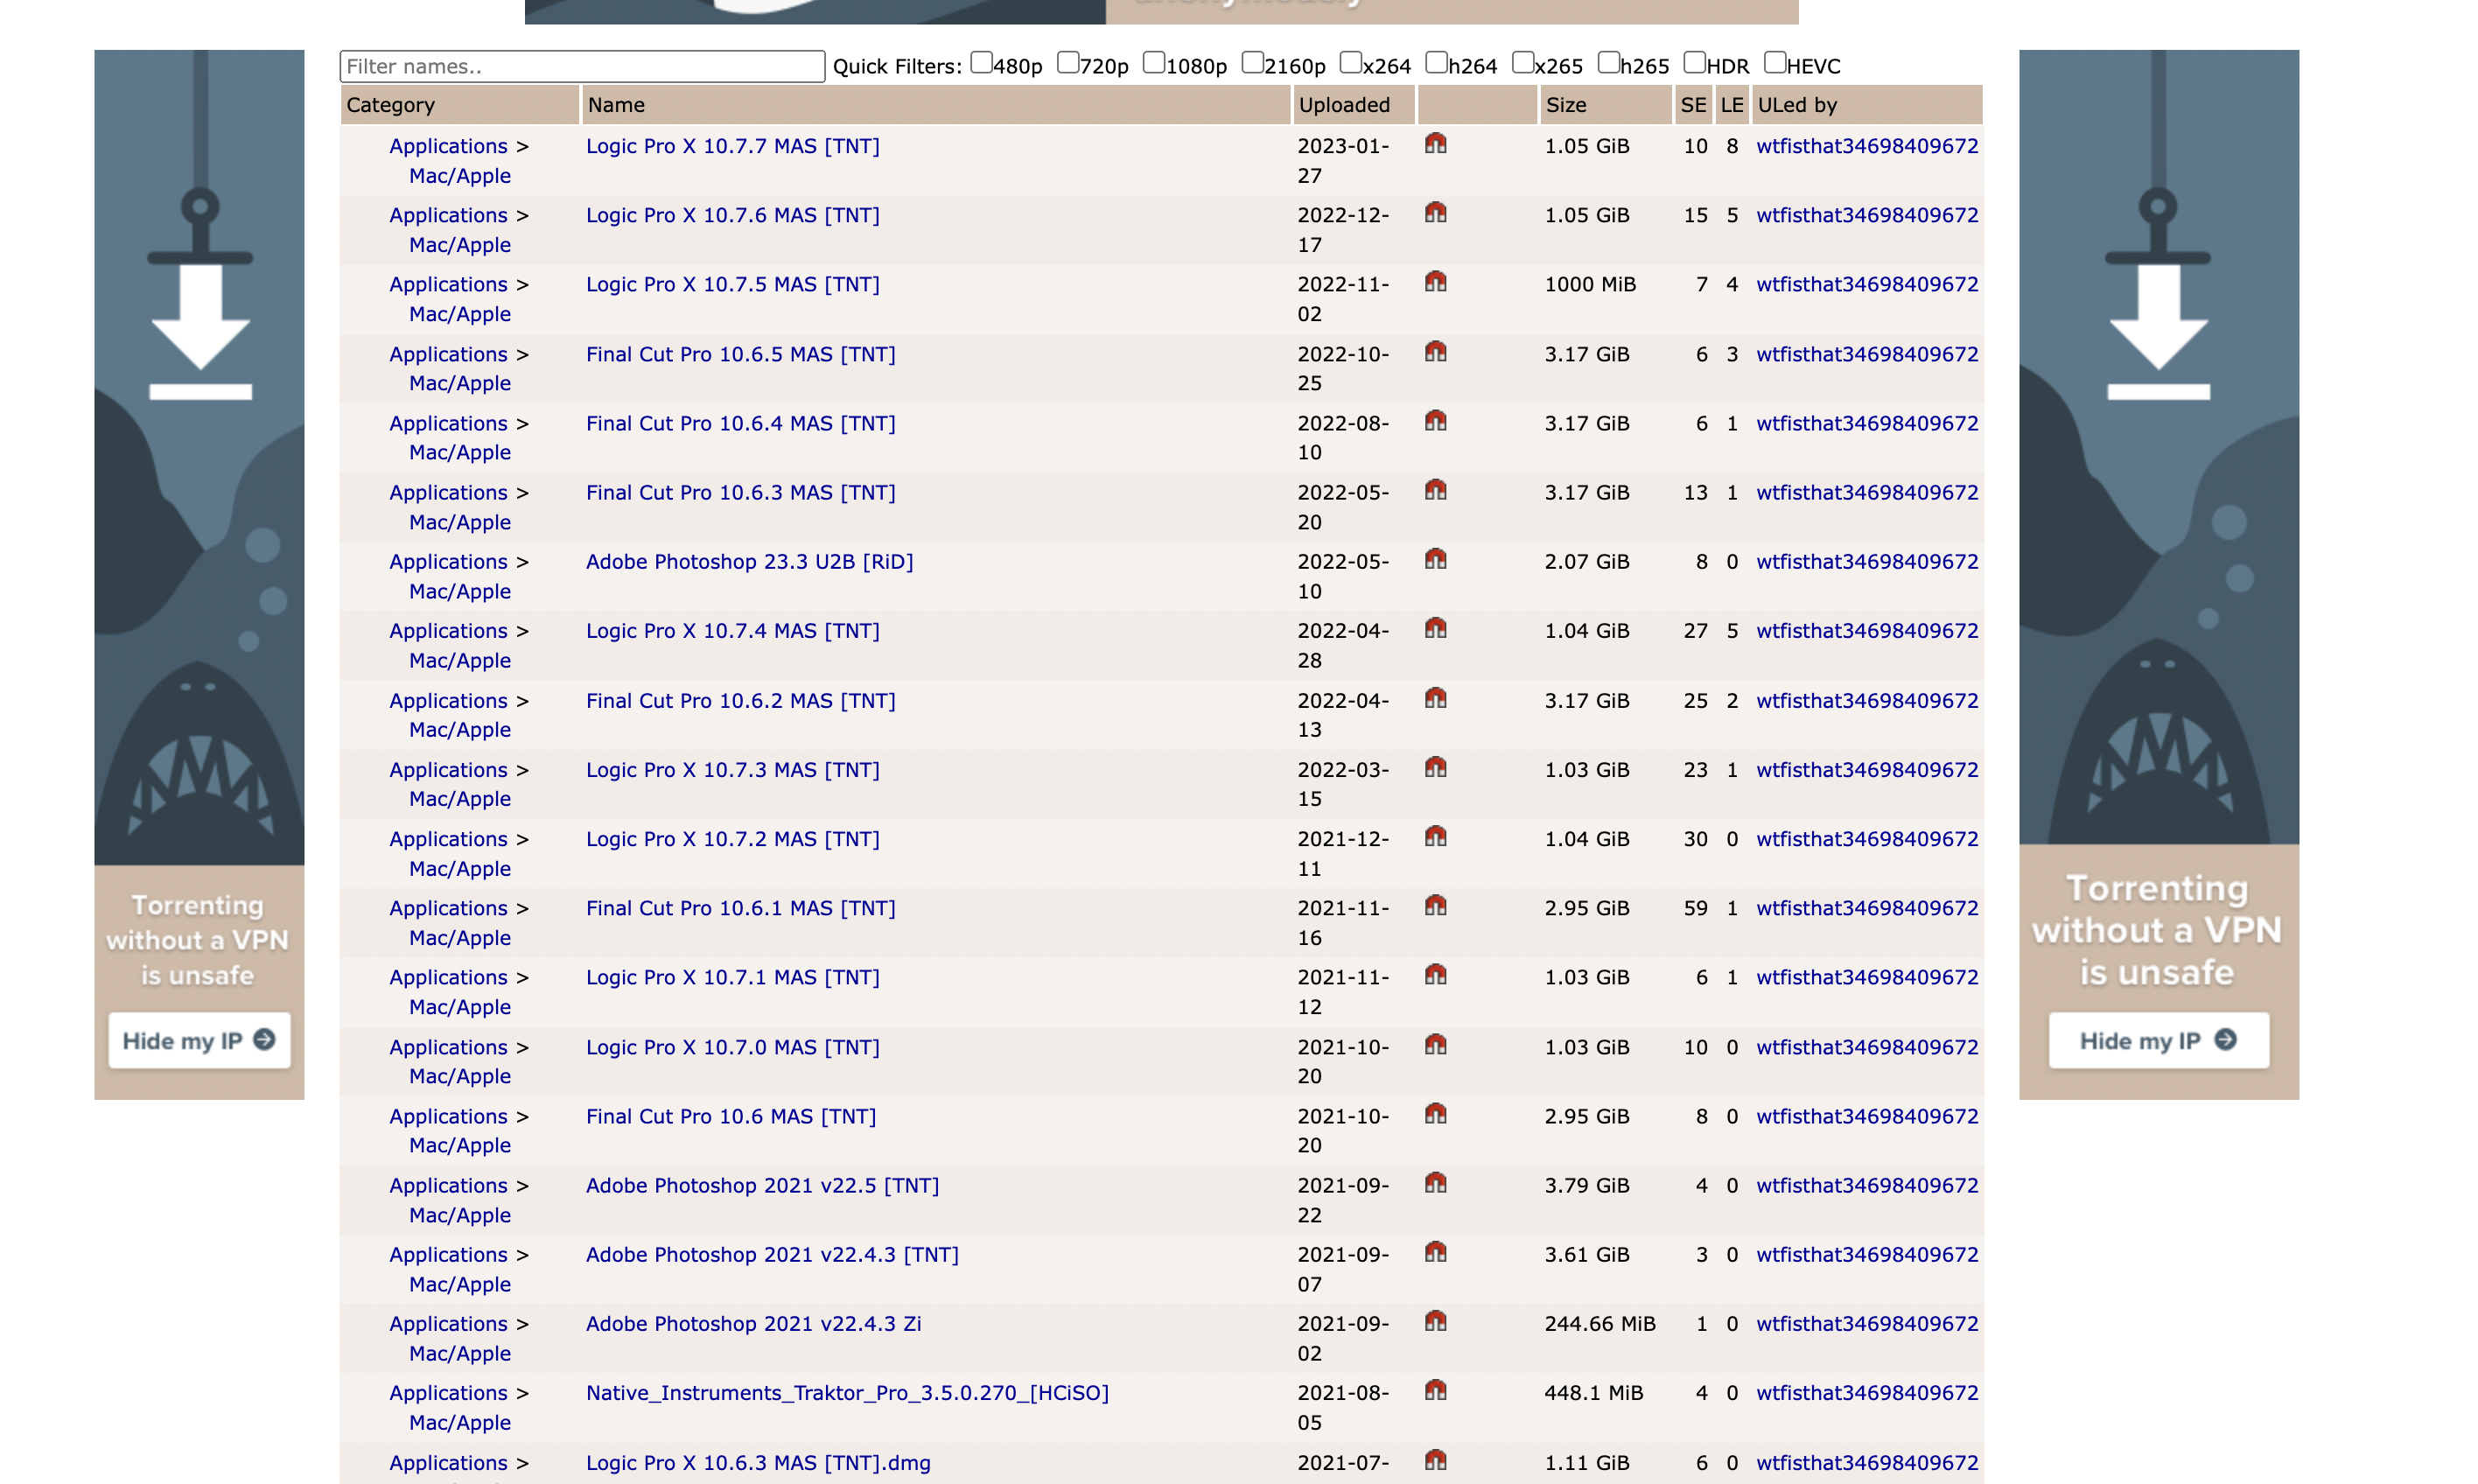 The malicious torrents on The Pirate Bay